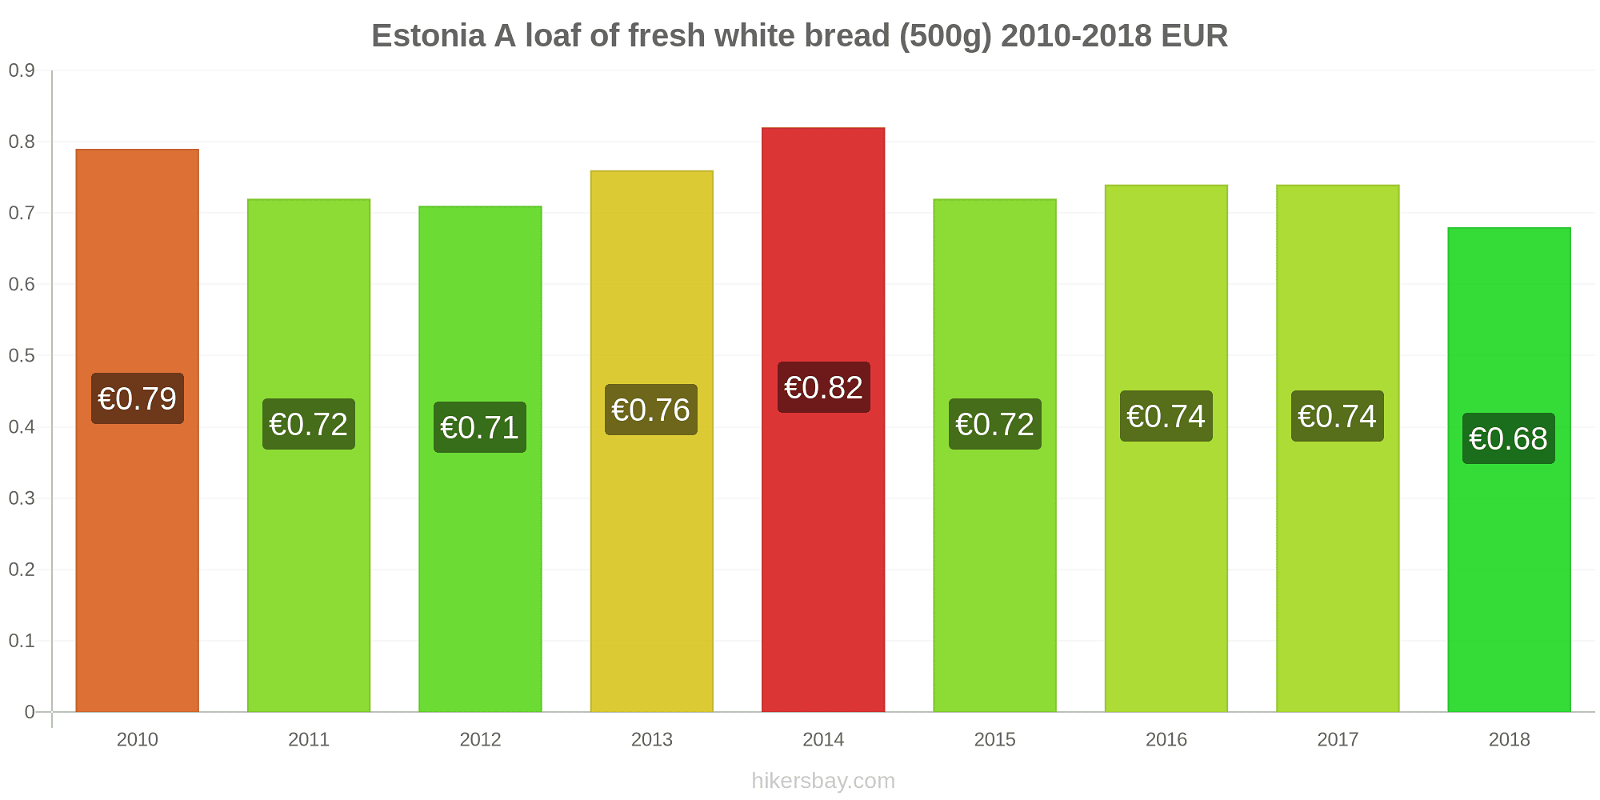 Estonia price changes A loaf of fresh white bread (500g) hikersbay.com